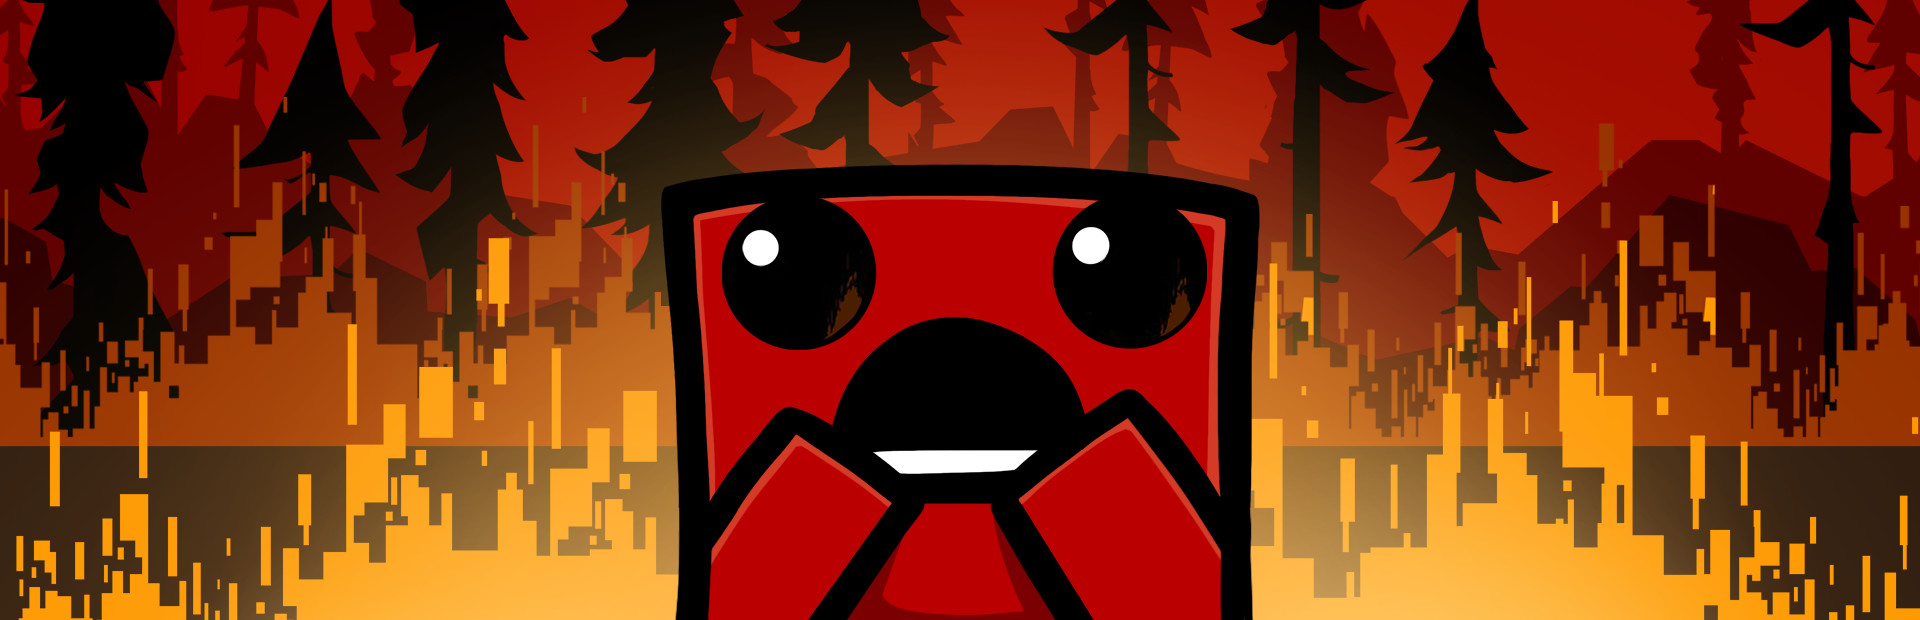 Super Meat Boy cover image